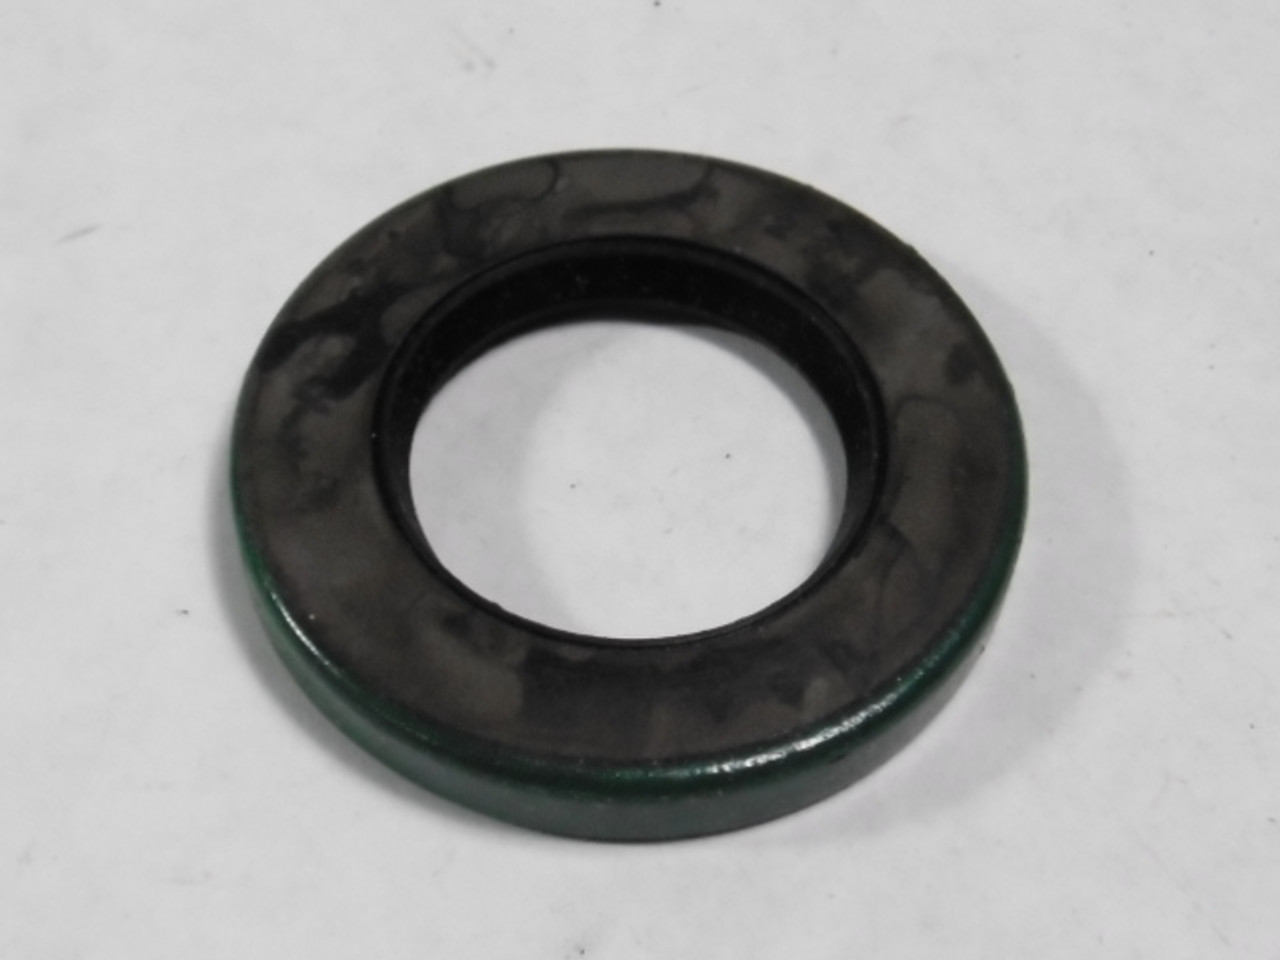 Chicago Rawhide 11223 Oil Seal 1.125x1.874x0.25" ! NEW !